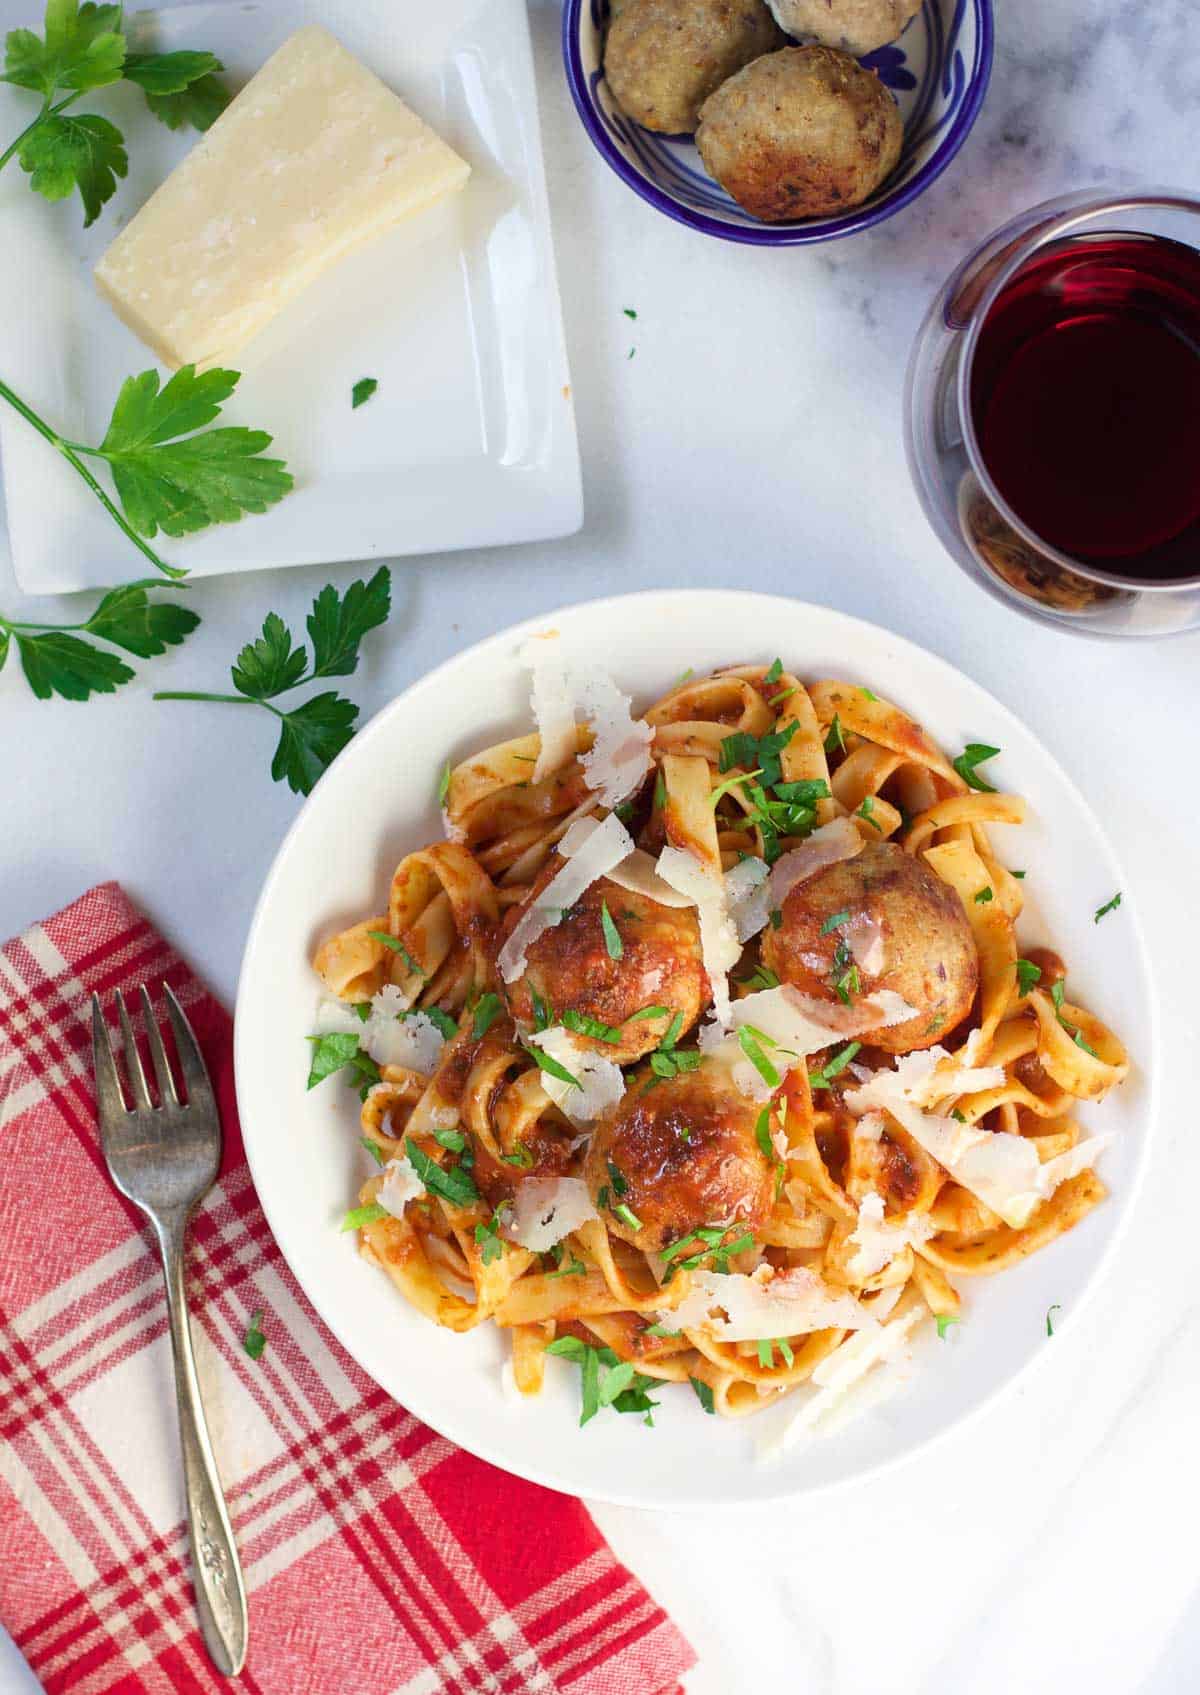 A bowl of pasta with smoked turkey meatballs and a glass of wine